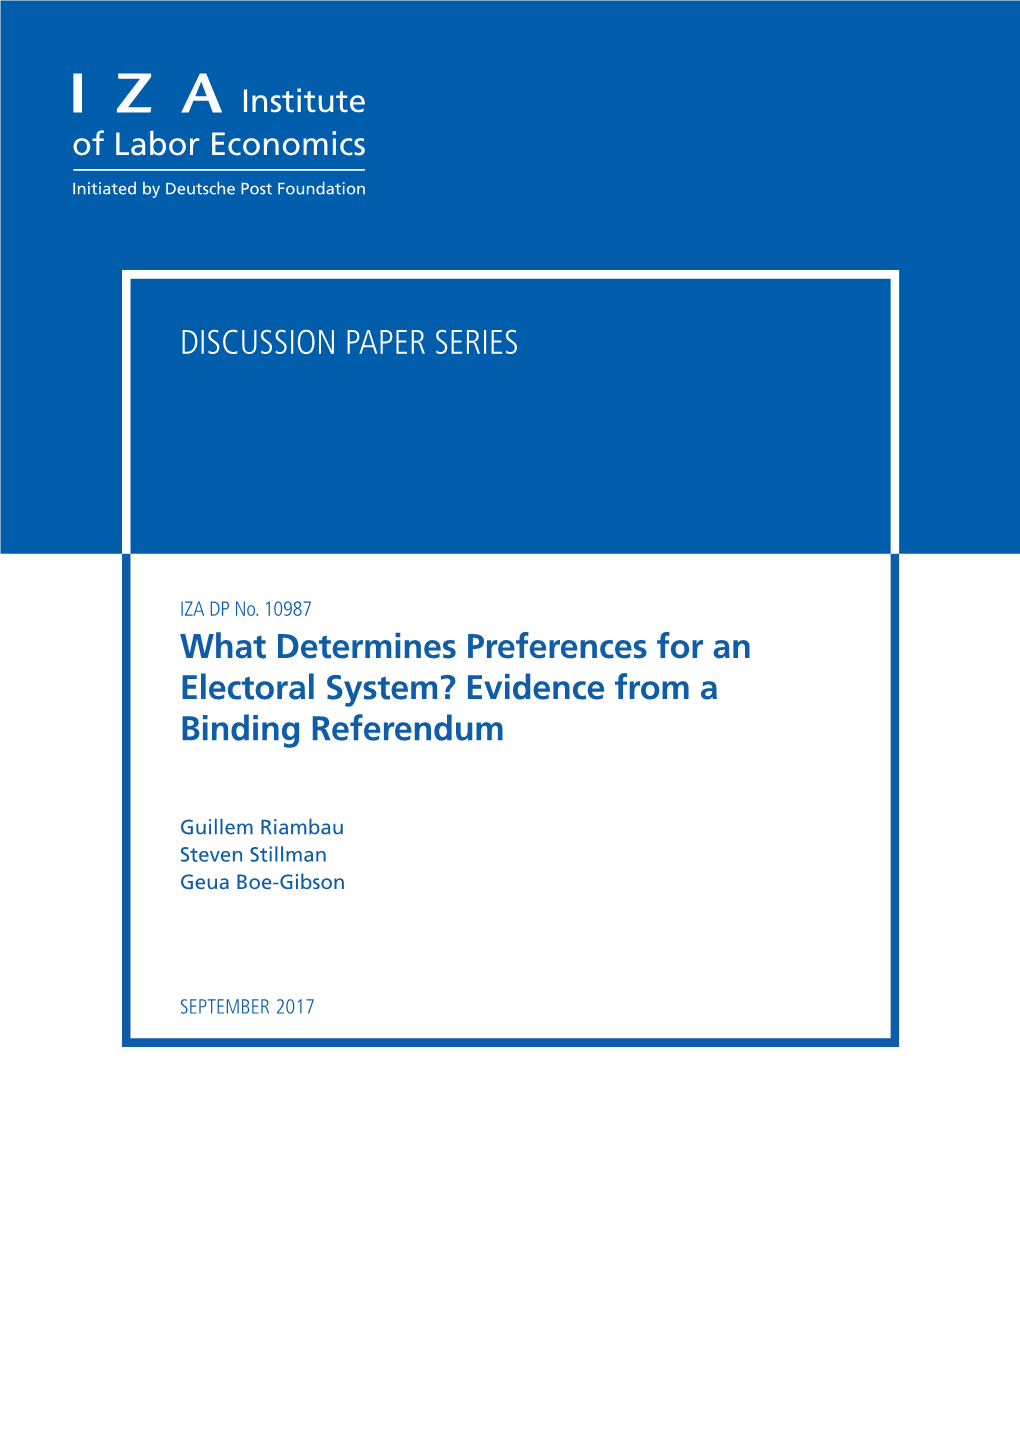 What Determines Preferences for an Electoral System? Evidence from a Binding Referendum